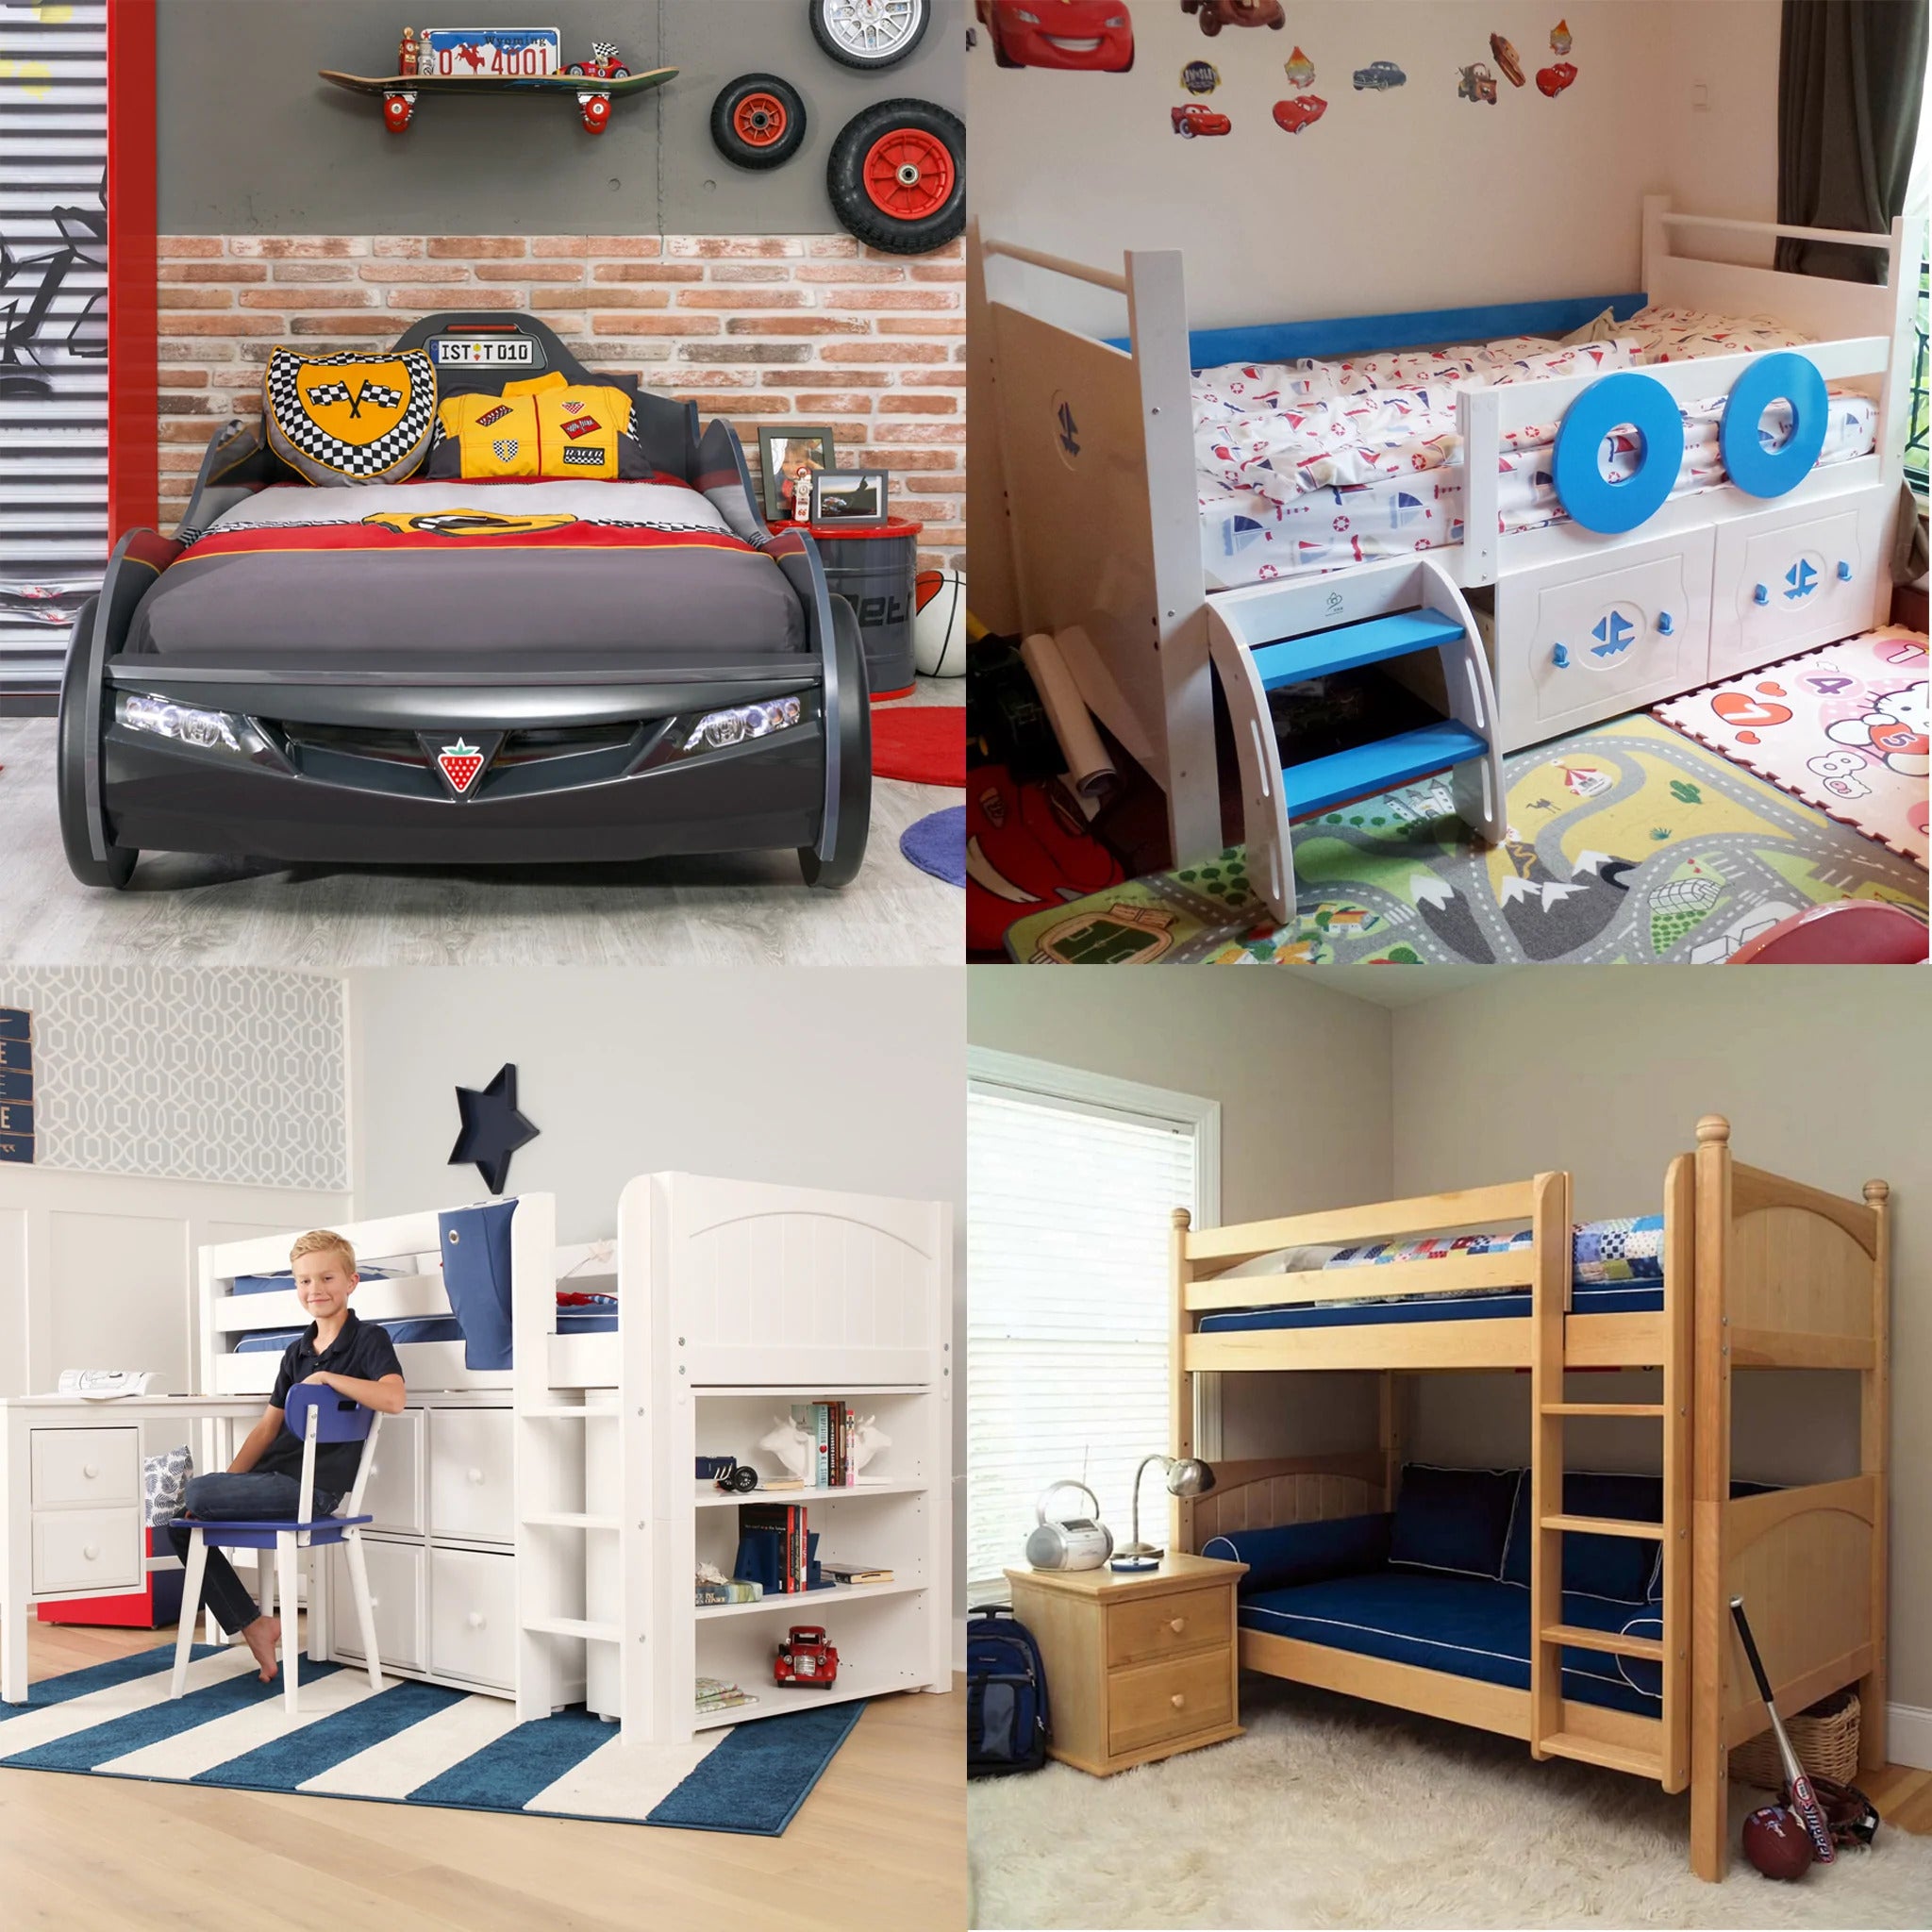 Low beds for children